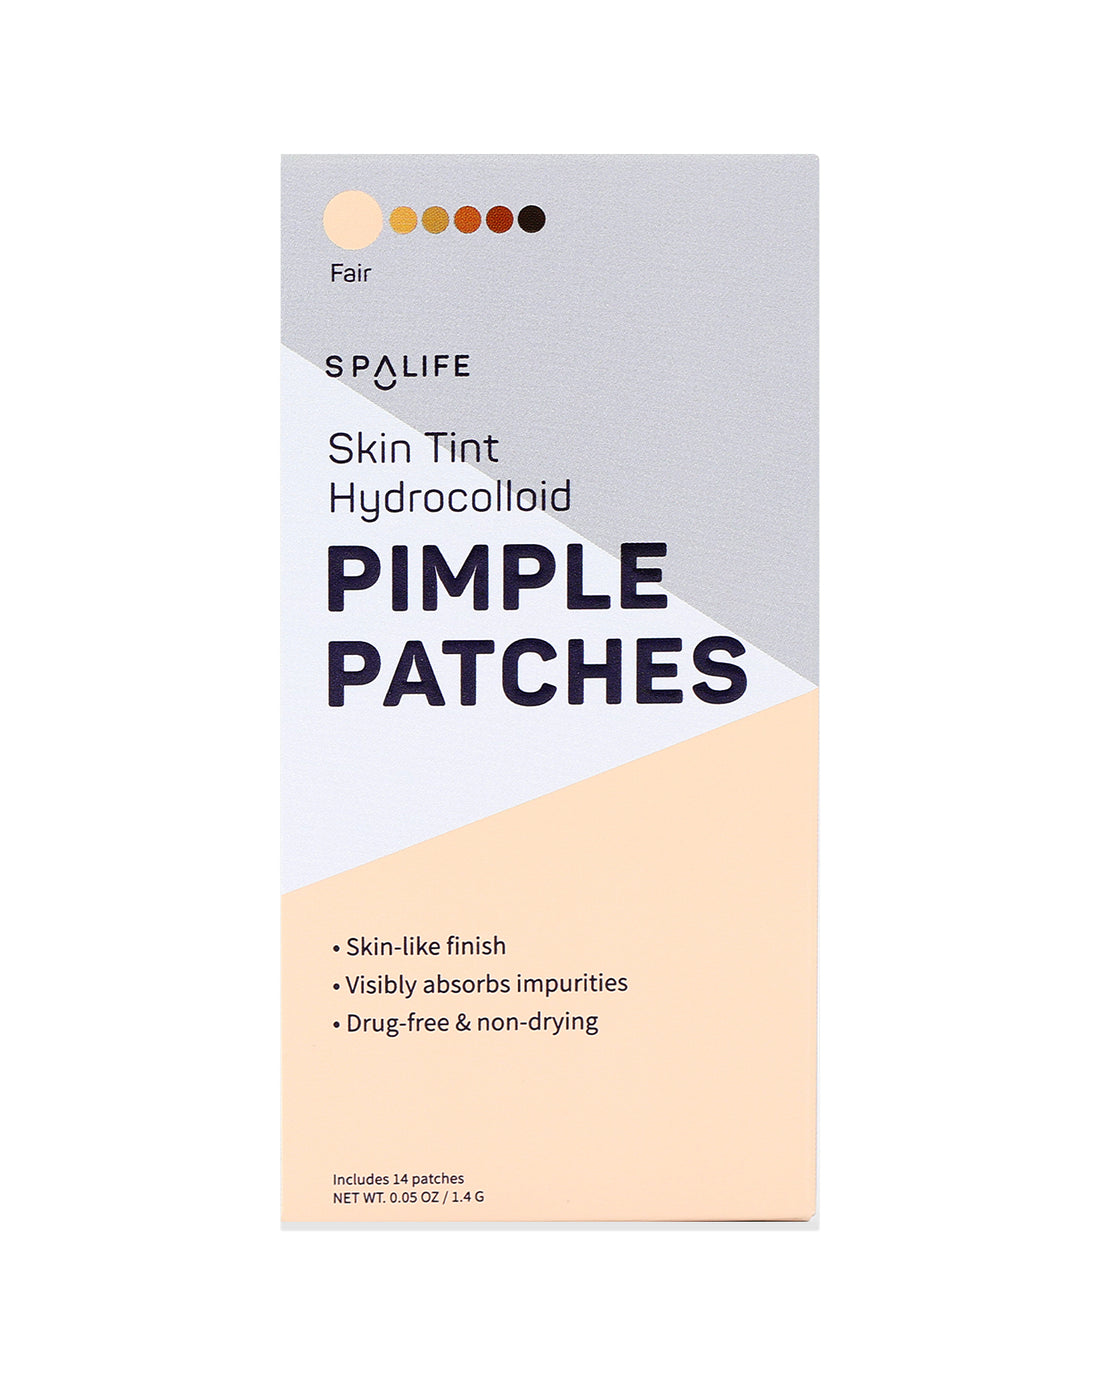 Skin_tint_pimple_patches_packe-99